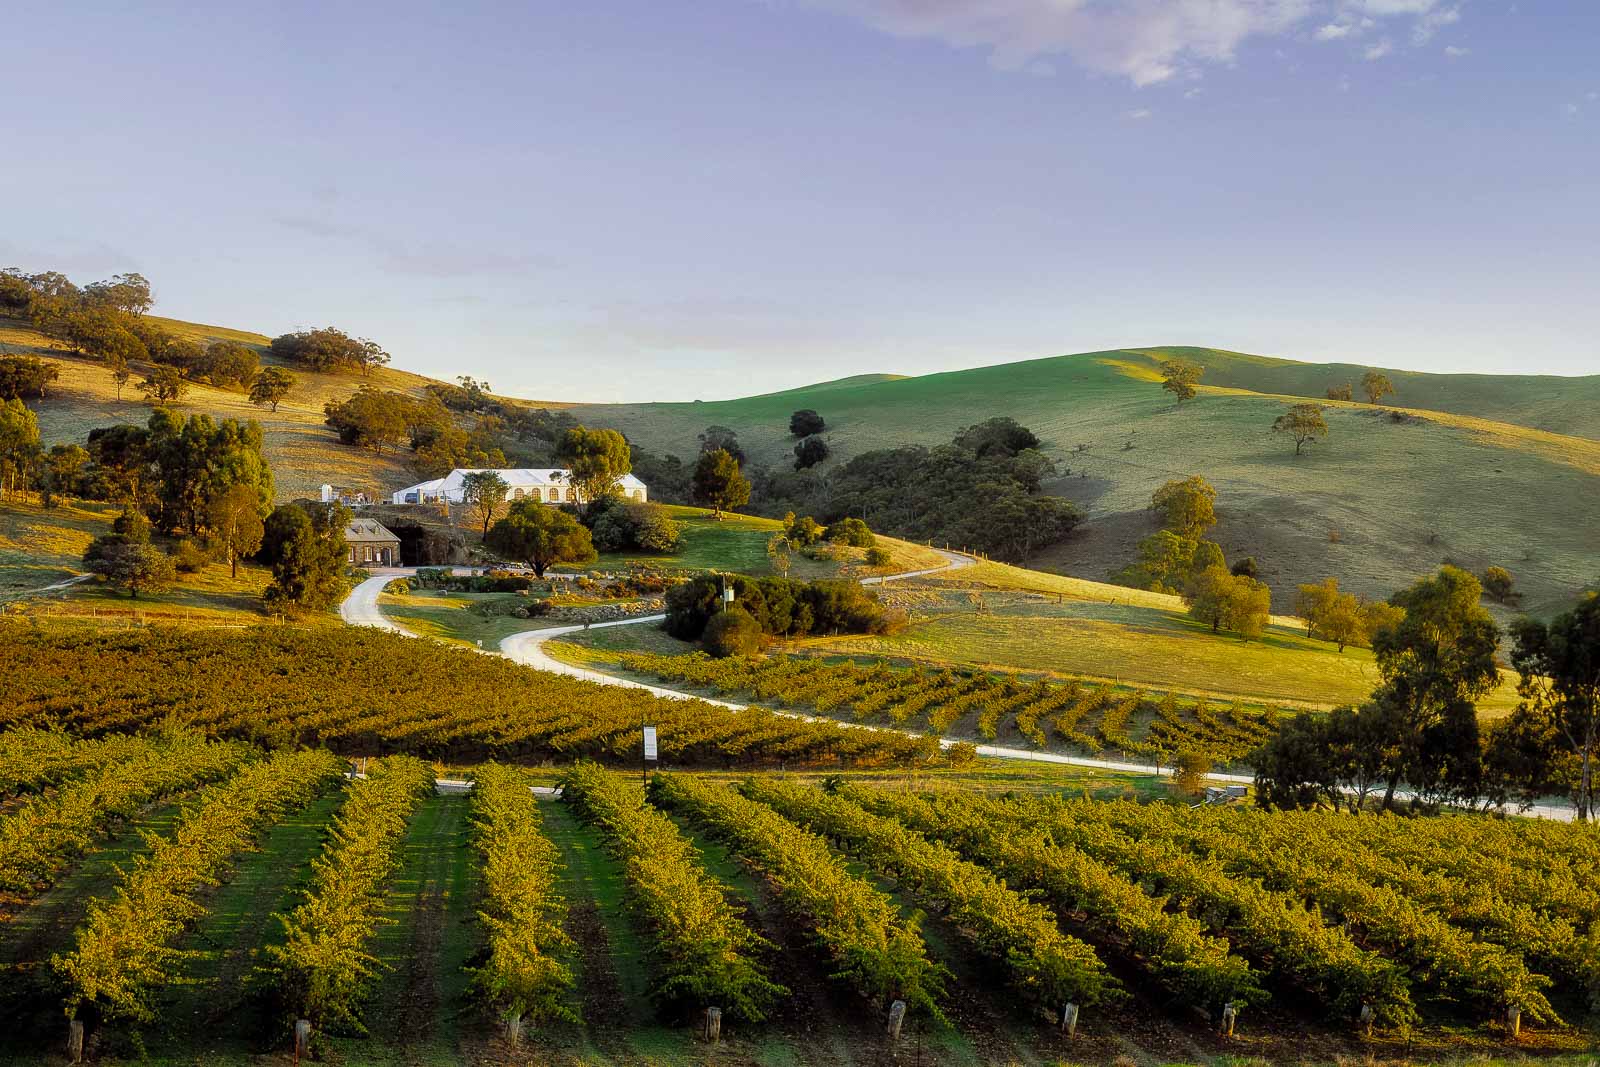 A Weekend Guide To The Barossa Valley